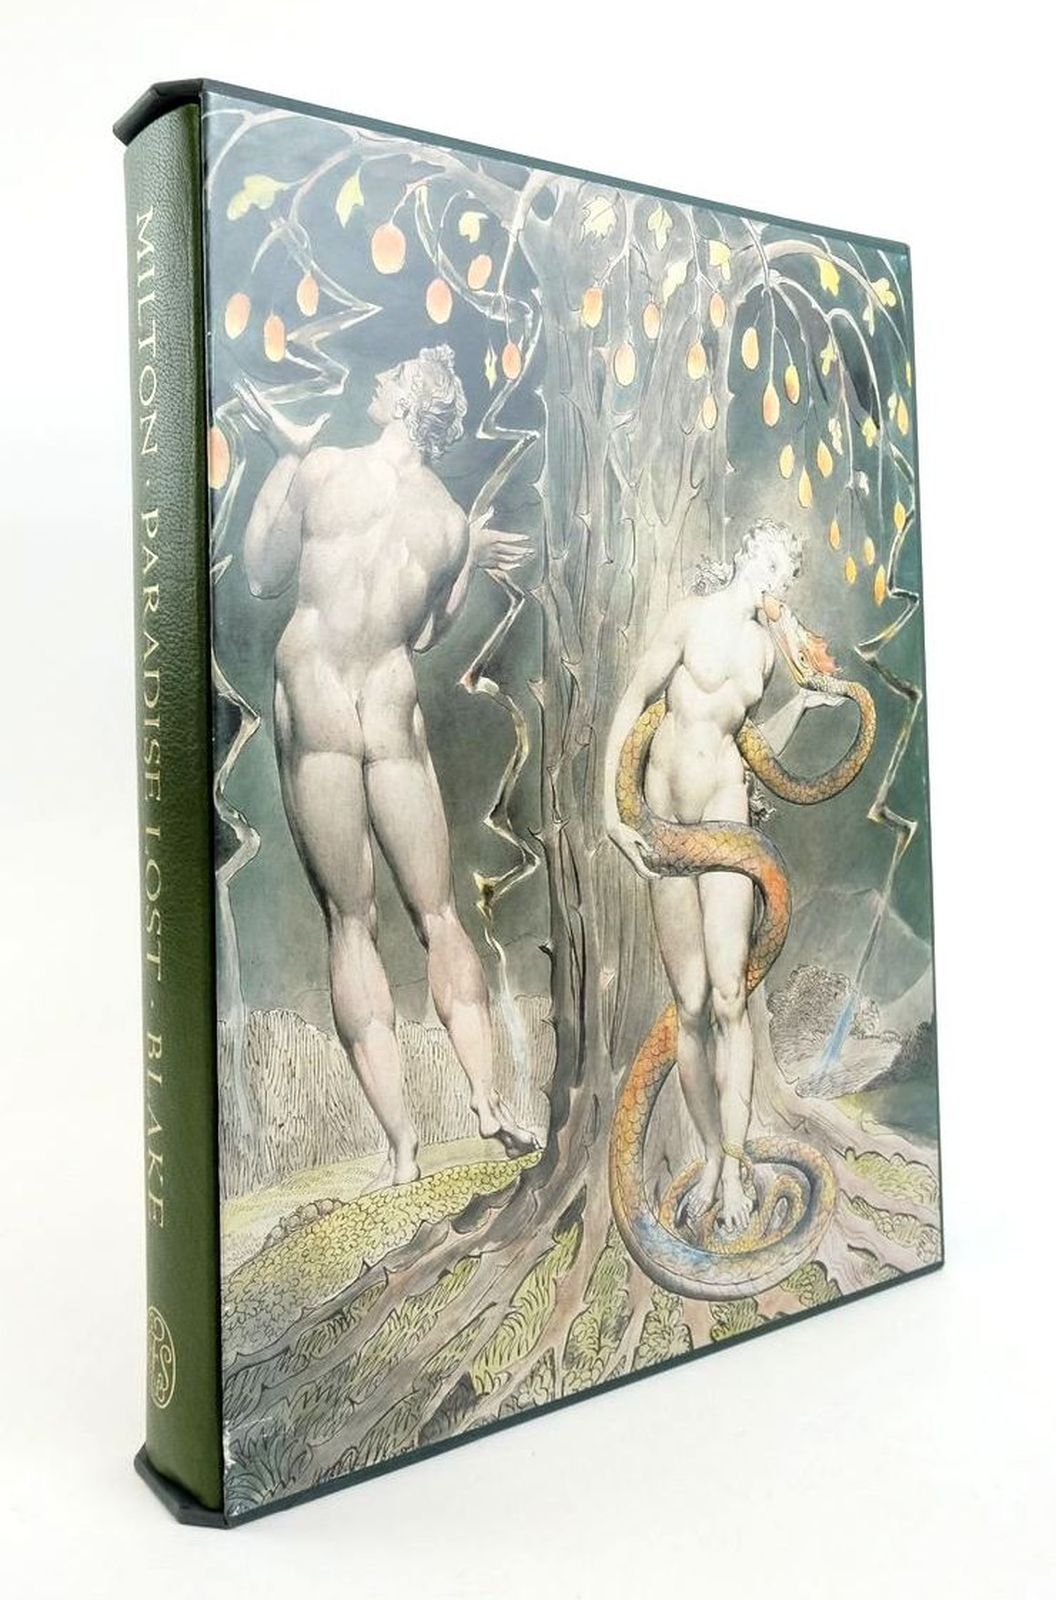 Photo of PARADISE LOST written by Milton, John Ackroyd, Peter Wain, John illustrated by Blake, William published by Folio Society (STOCK CODE: 1823018)  for sale by Stella & Rose's Books